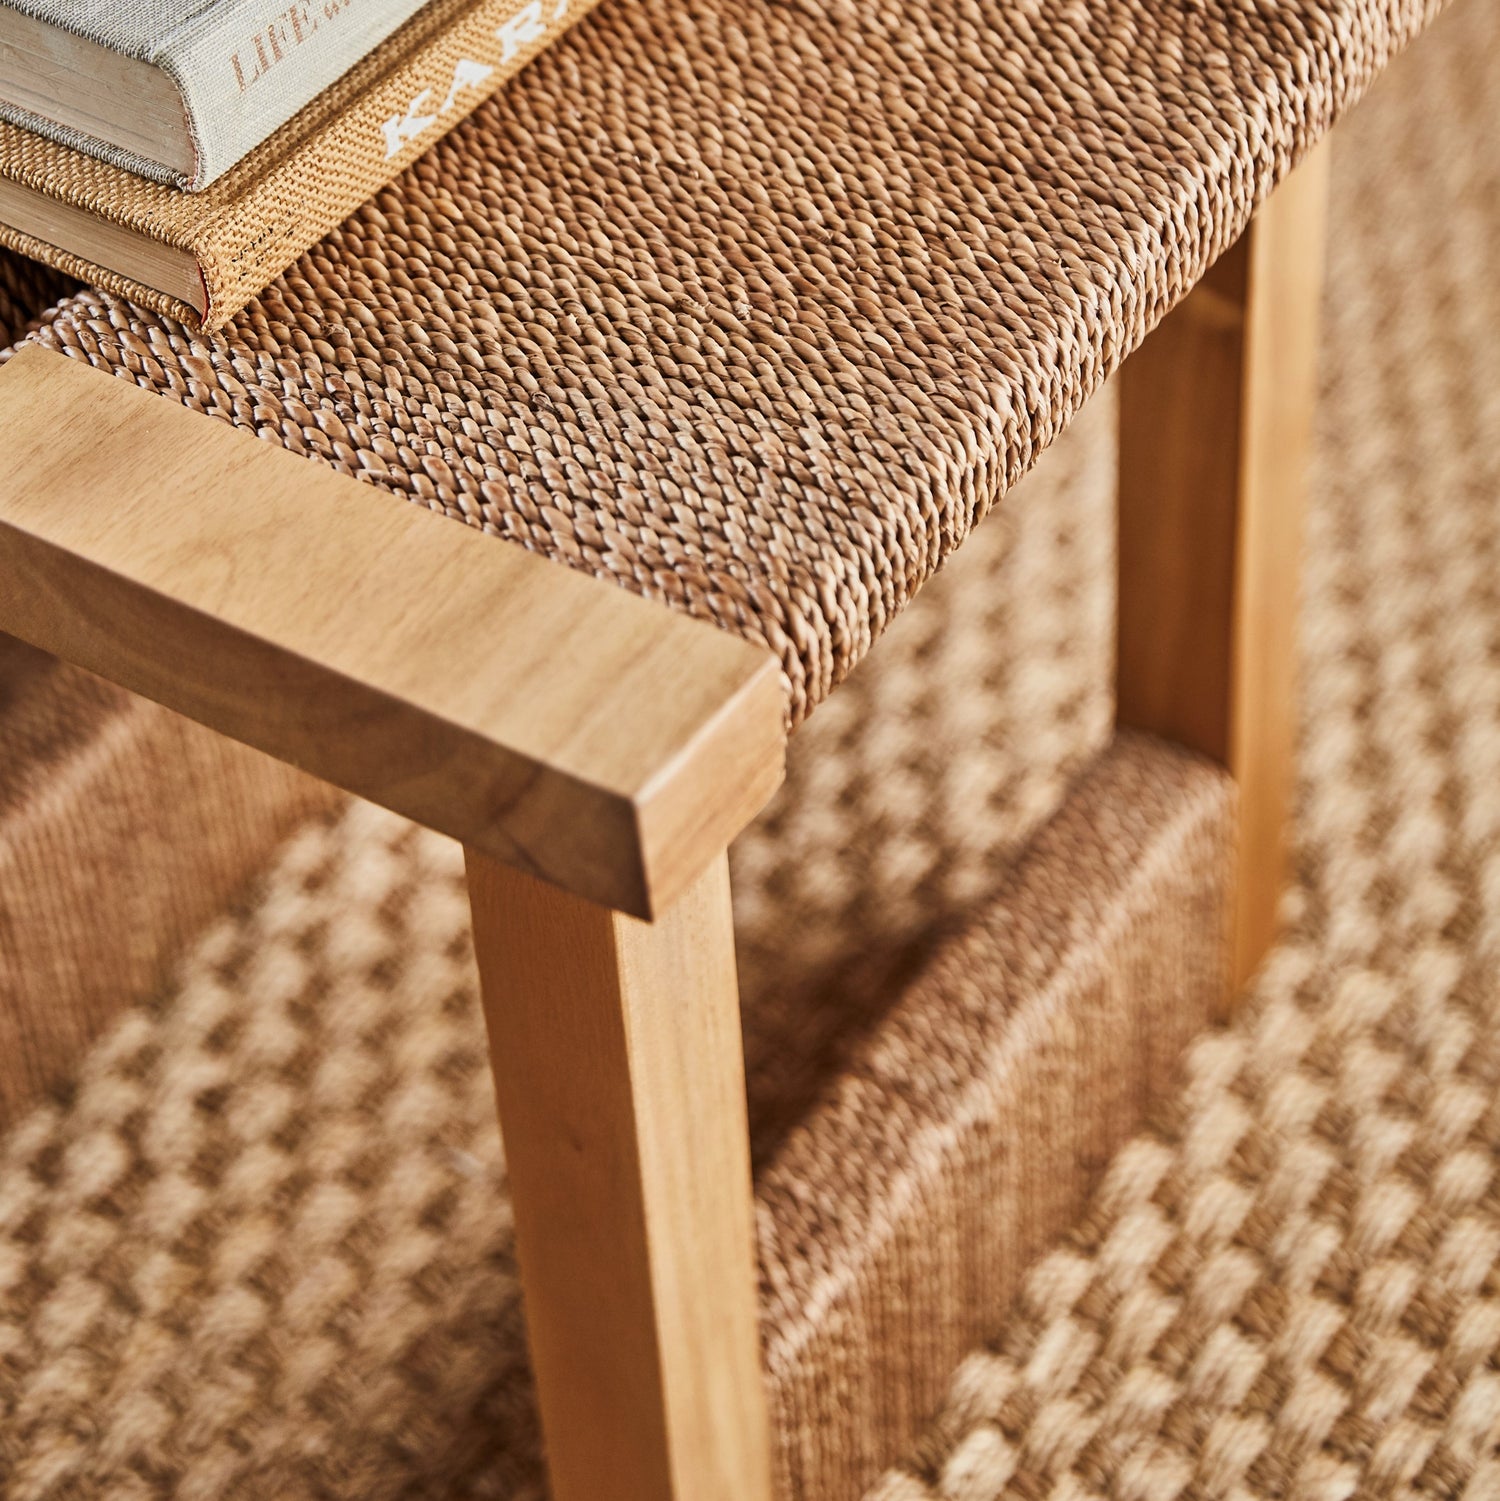 Textura Side Table